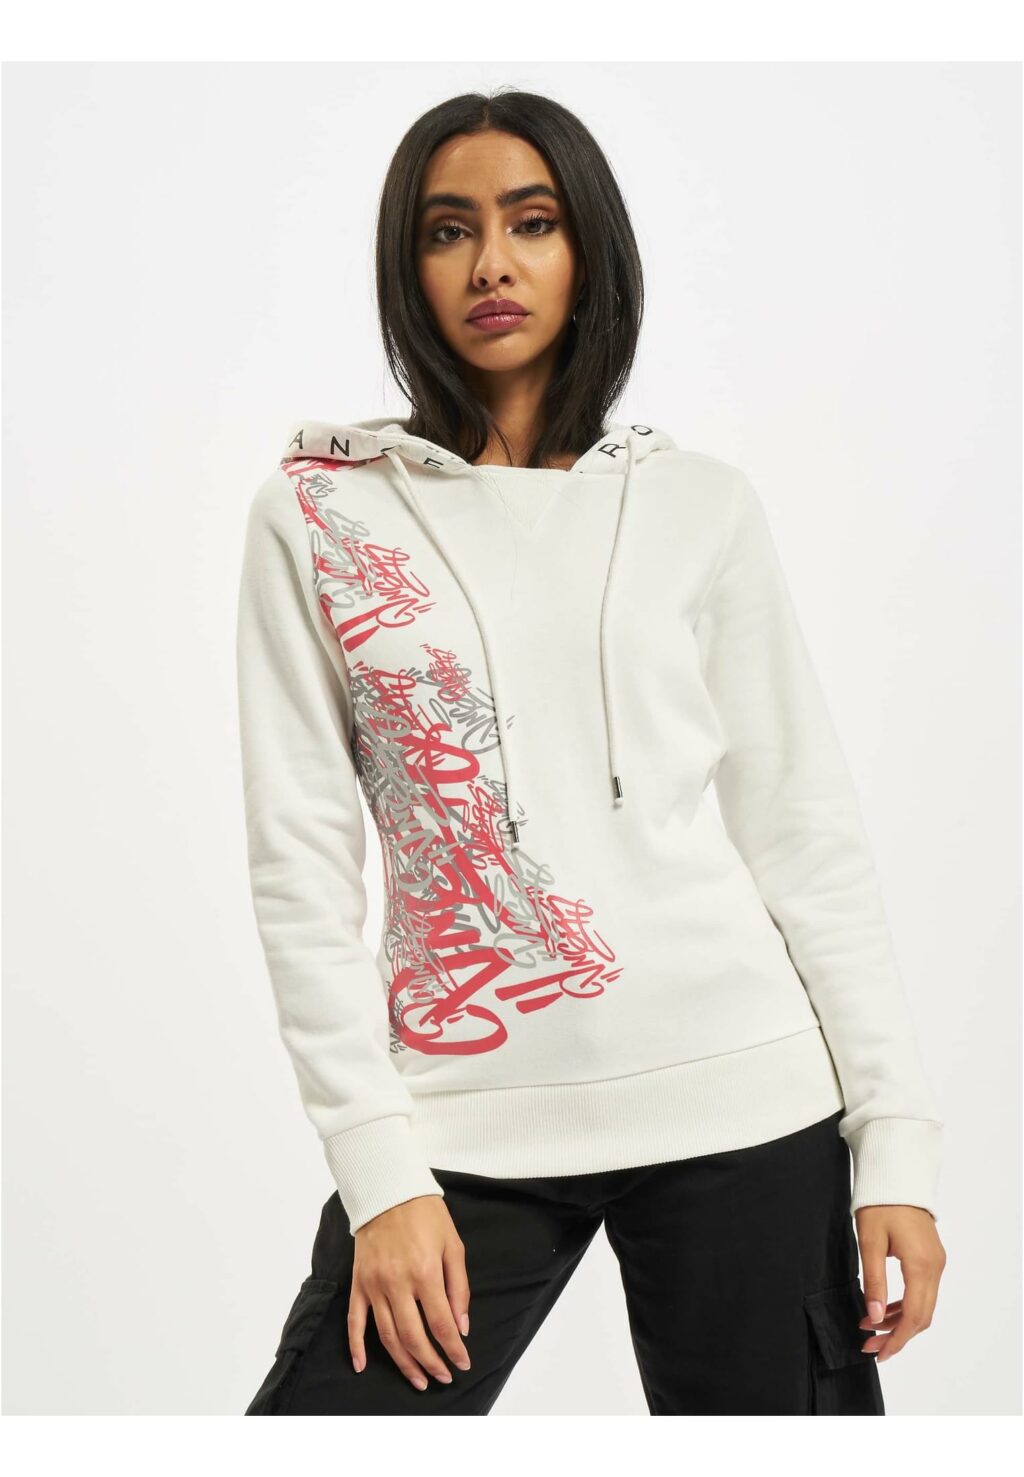 Tagg Basic Hoody white/pink DLHD096